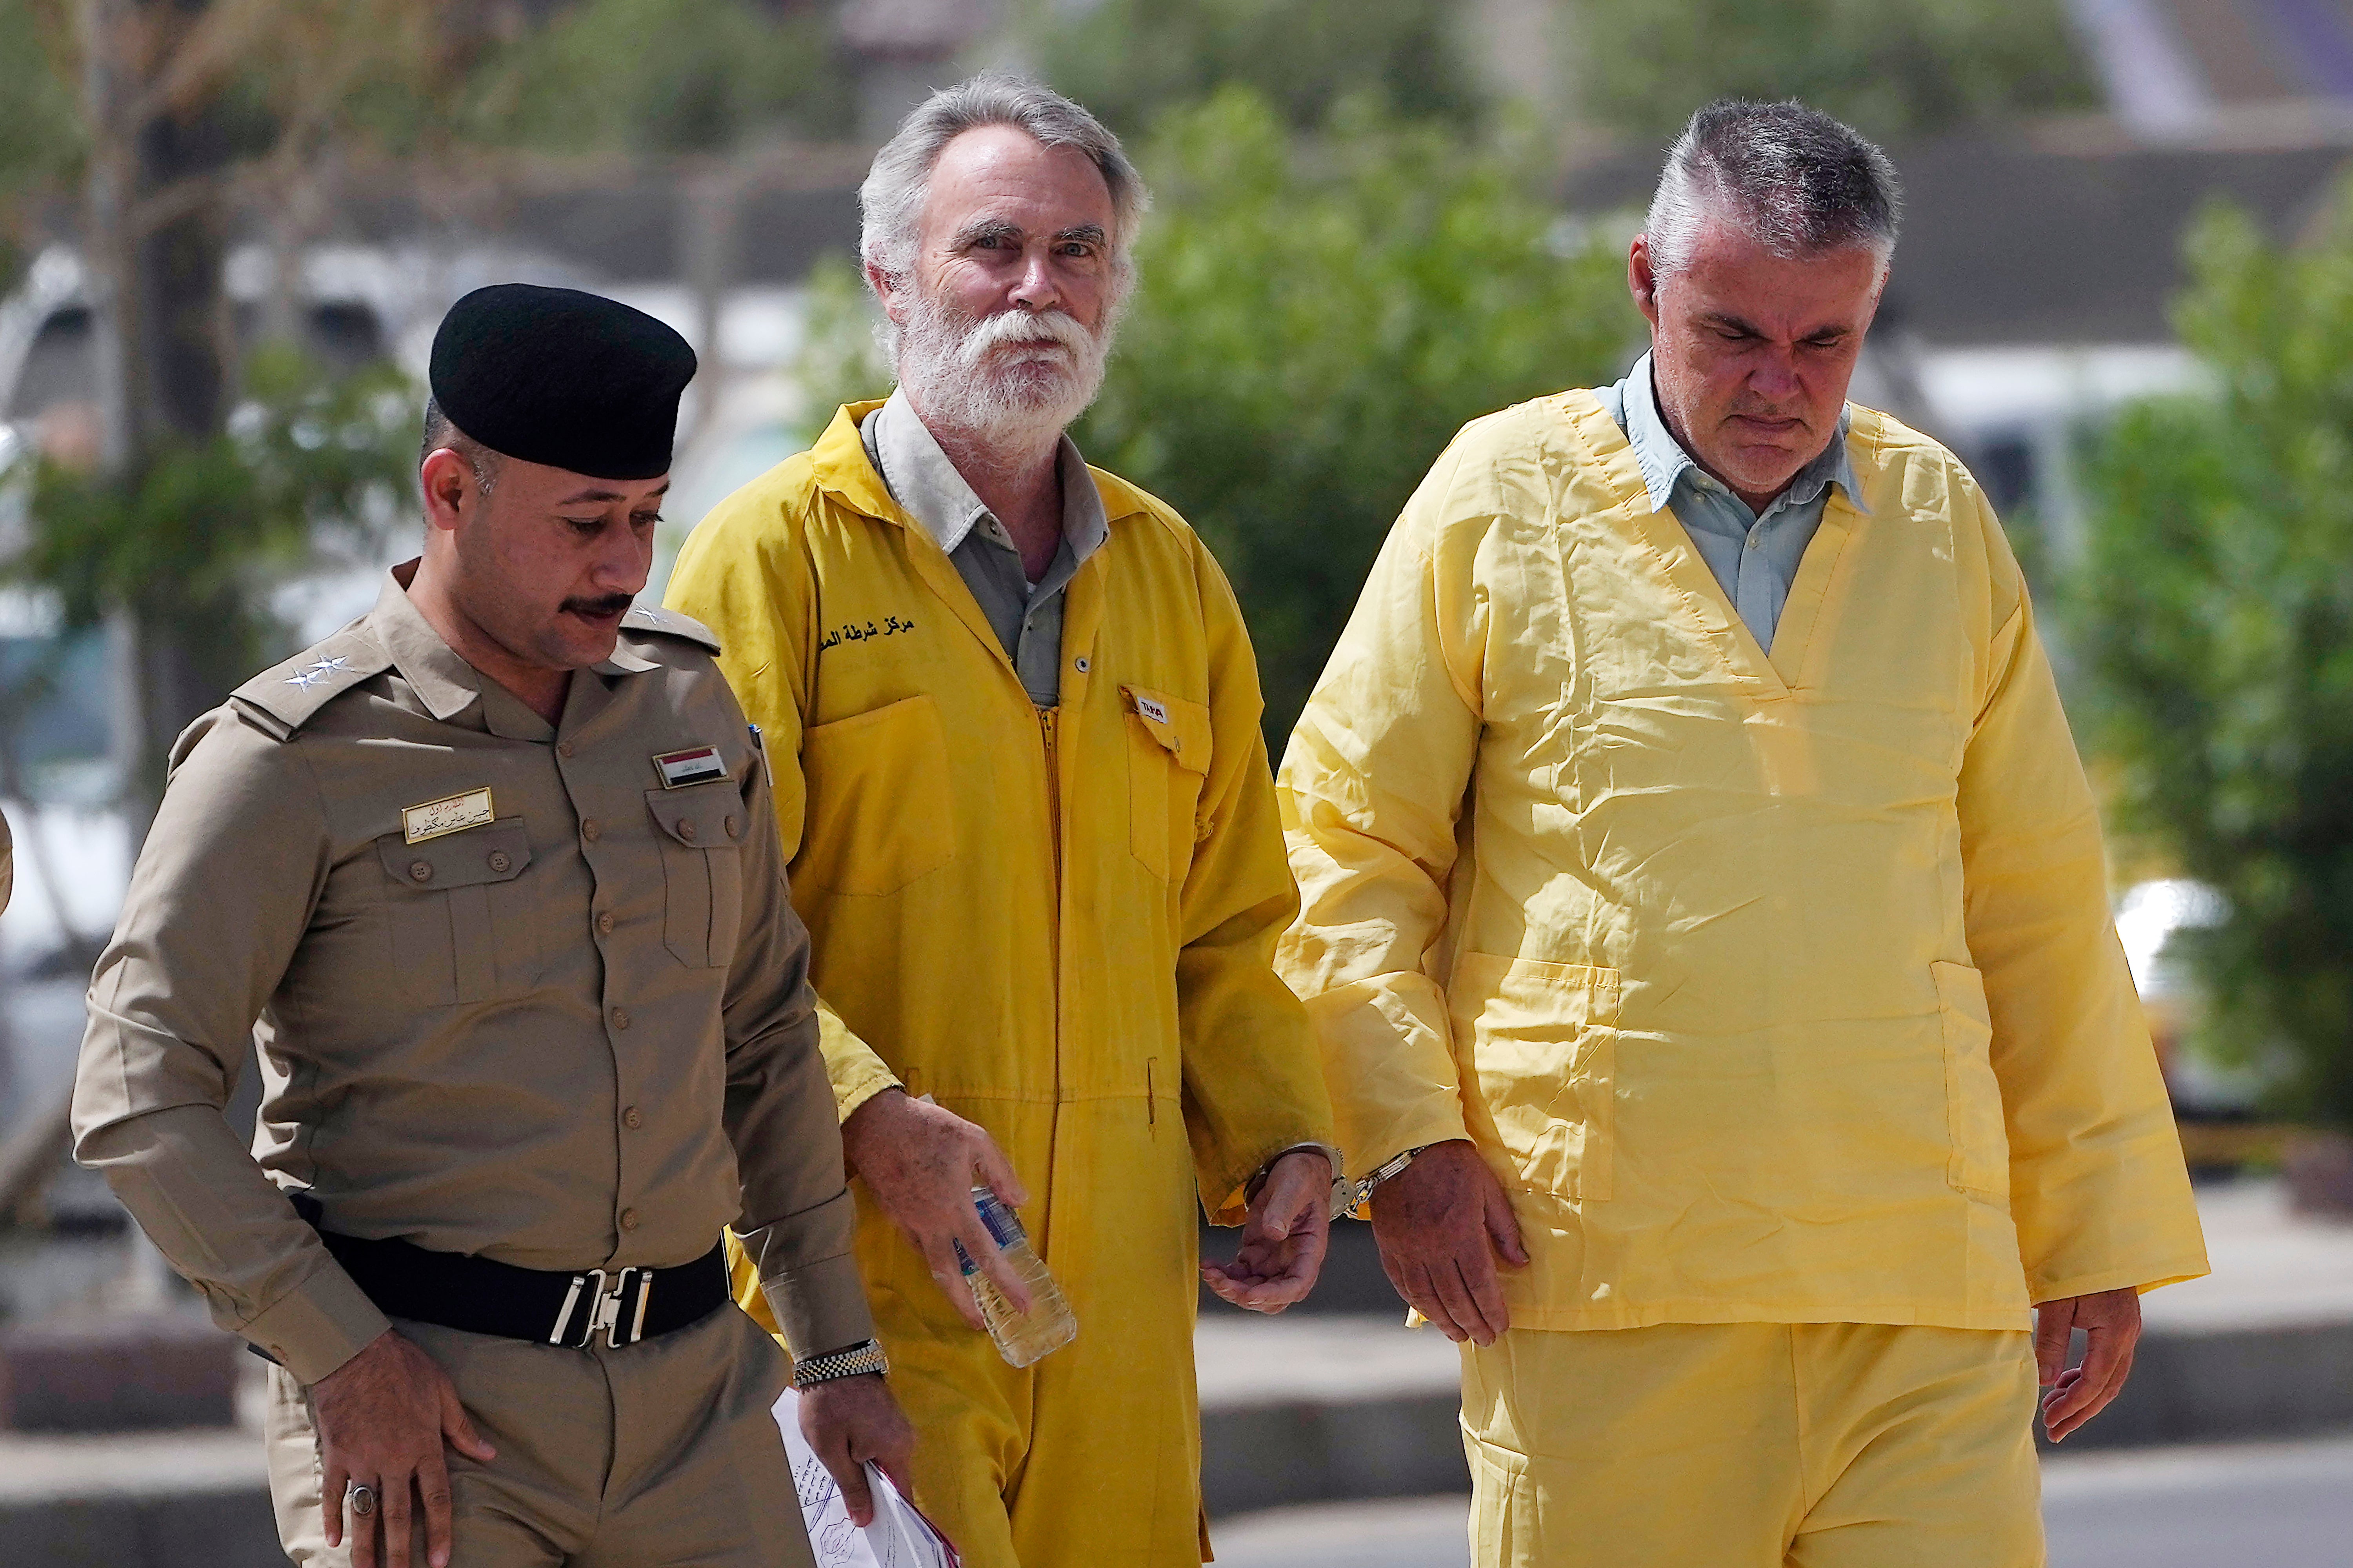 Jim Fitton has been handed a 15-year sentence in Iraq